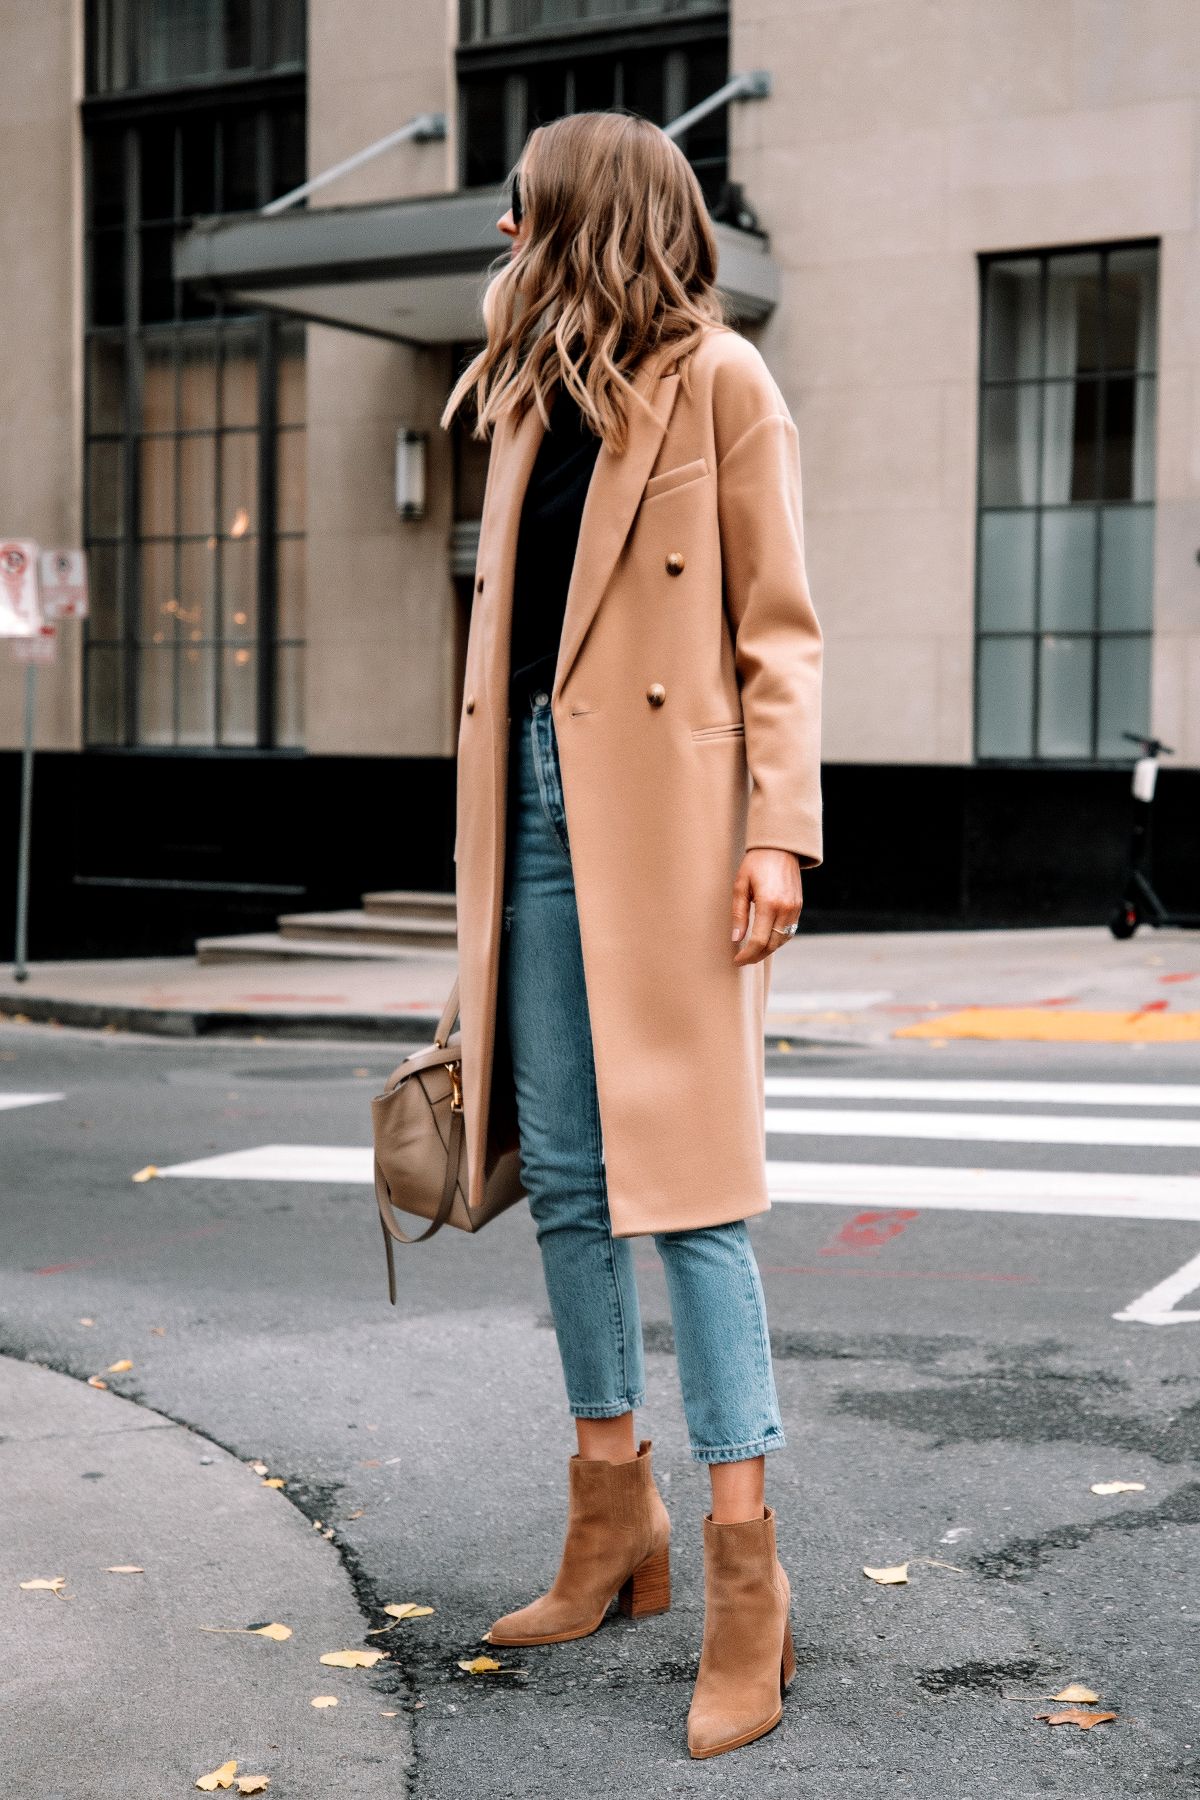 https://patricinhaesperta.com.br/wp-content/uploads/2023/04/An-Easy-Outfit-to-Recreate-With-Your-Camel-Coat-Fashion-Jackson.jpg